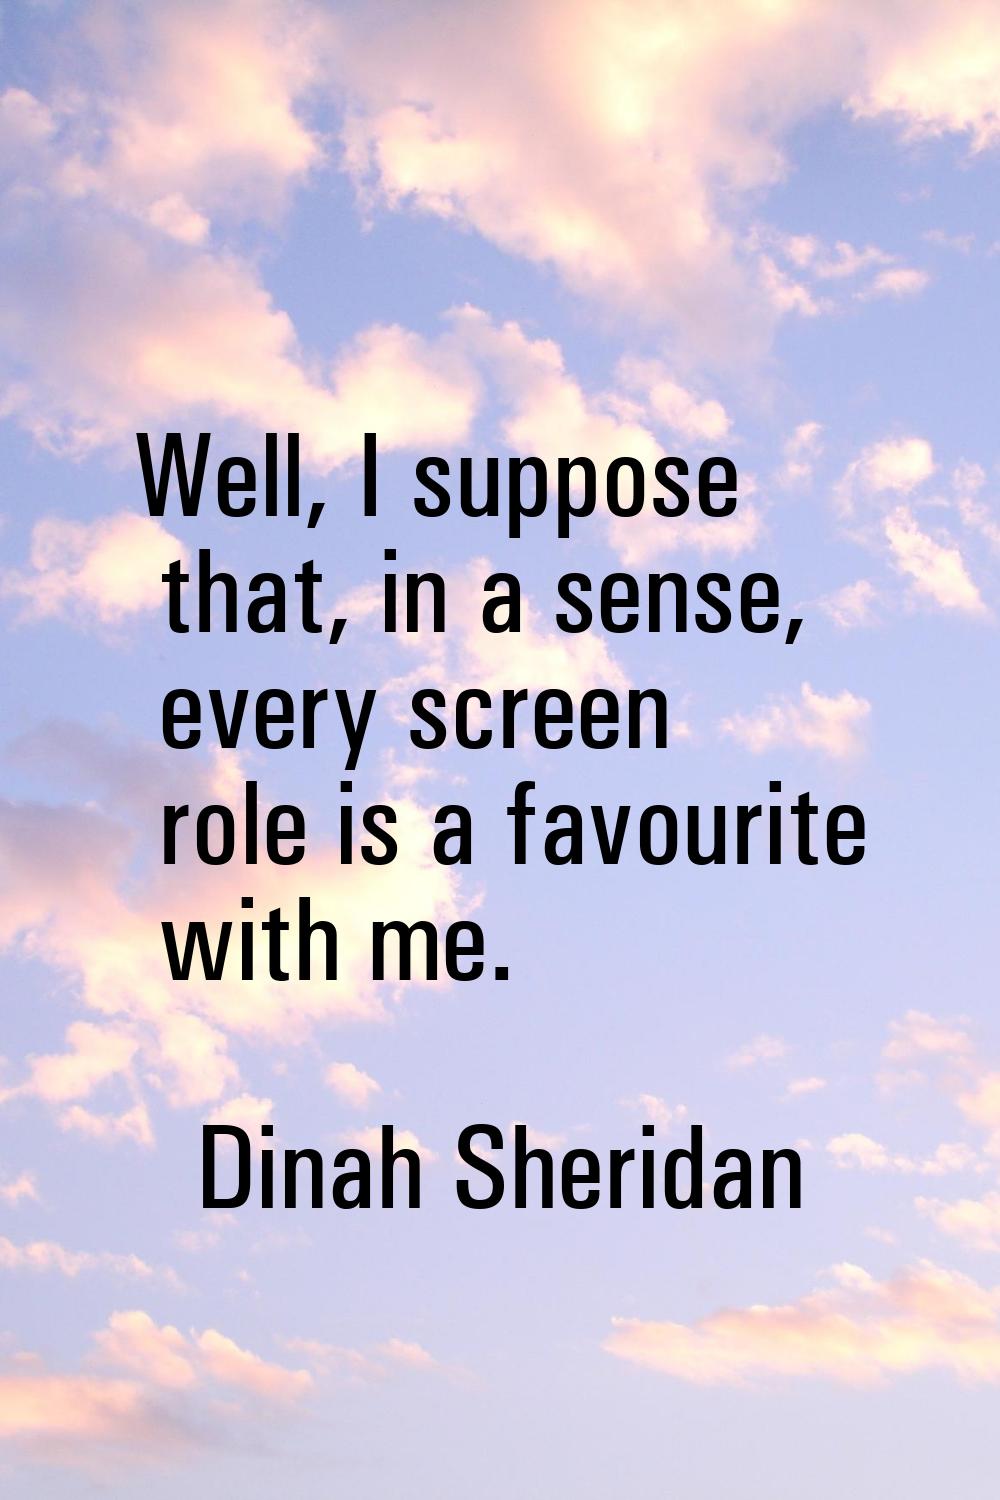 Well, I suppose that, in a sense, every screen role is a favourite with me.